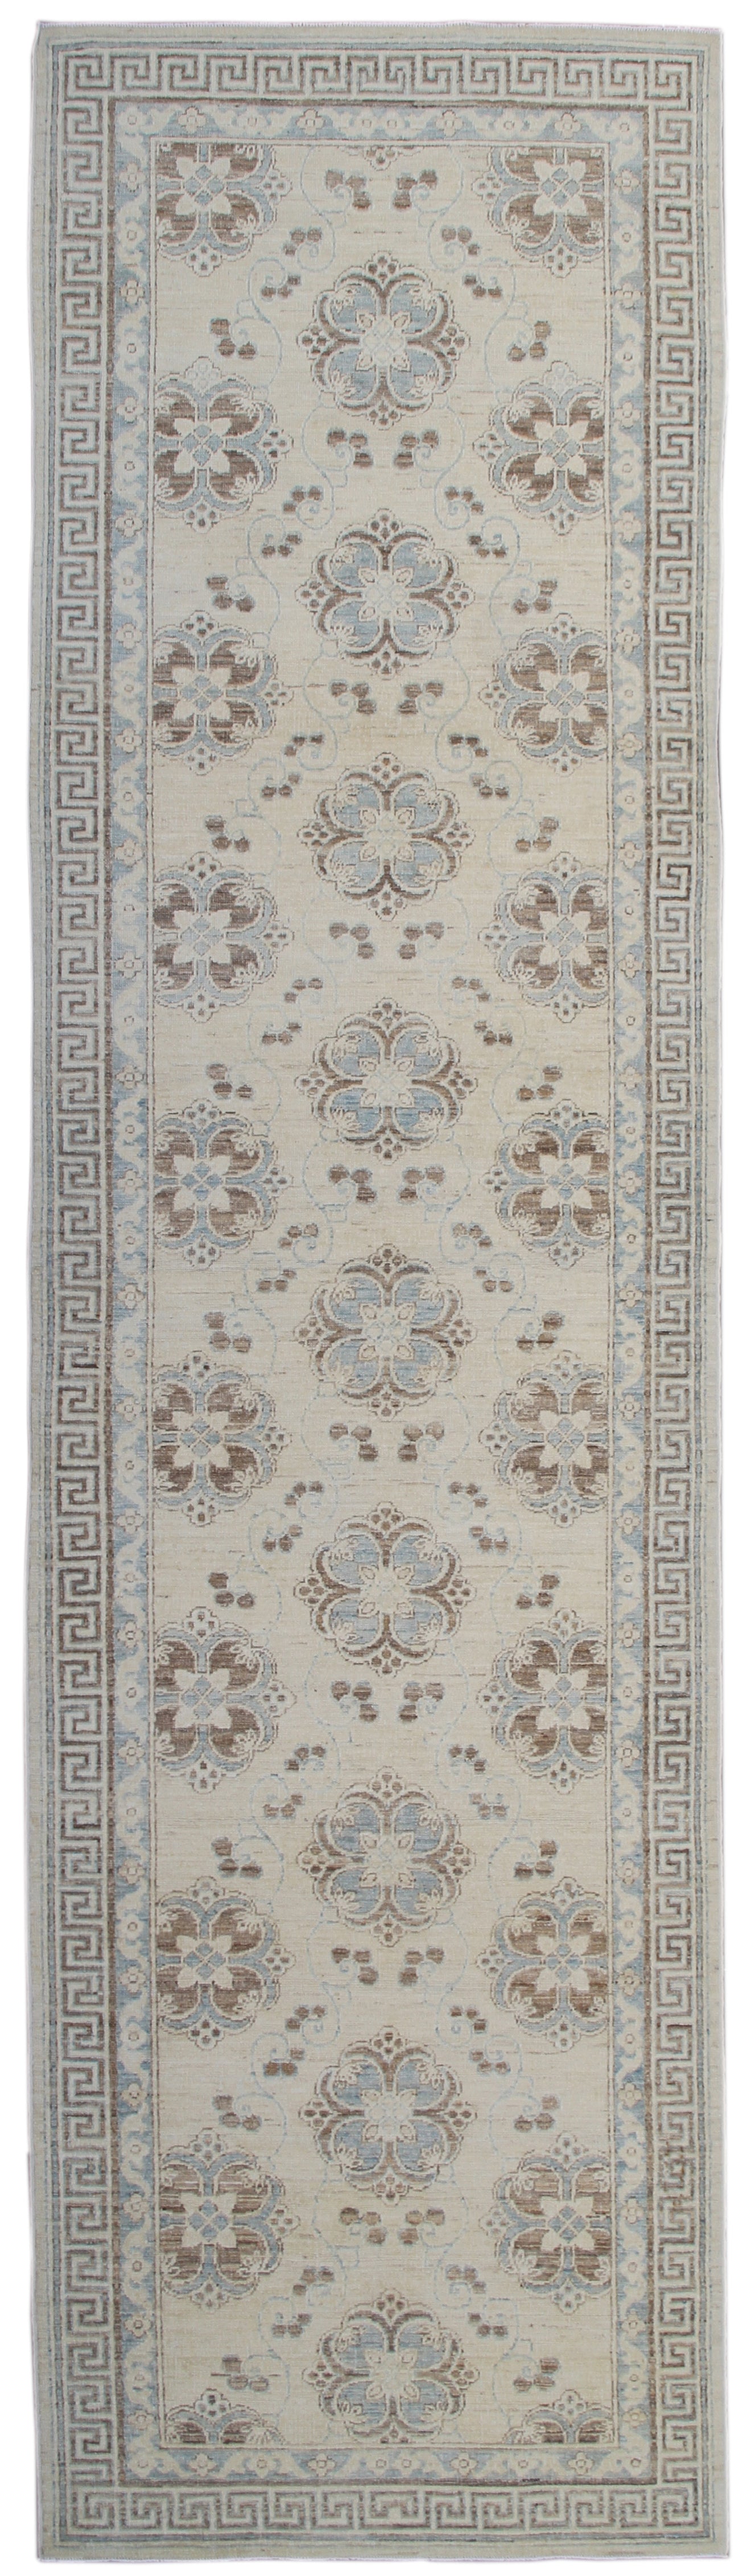 3'x12' Floral Design Ariana Transitional Blue Ivory Brown Runner Rug